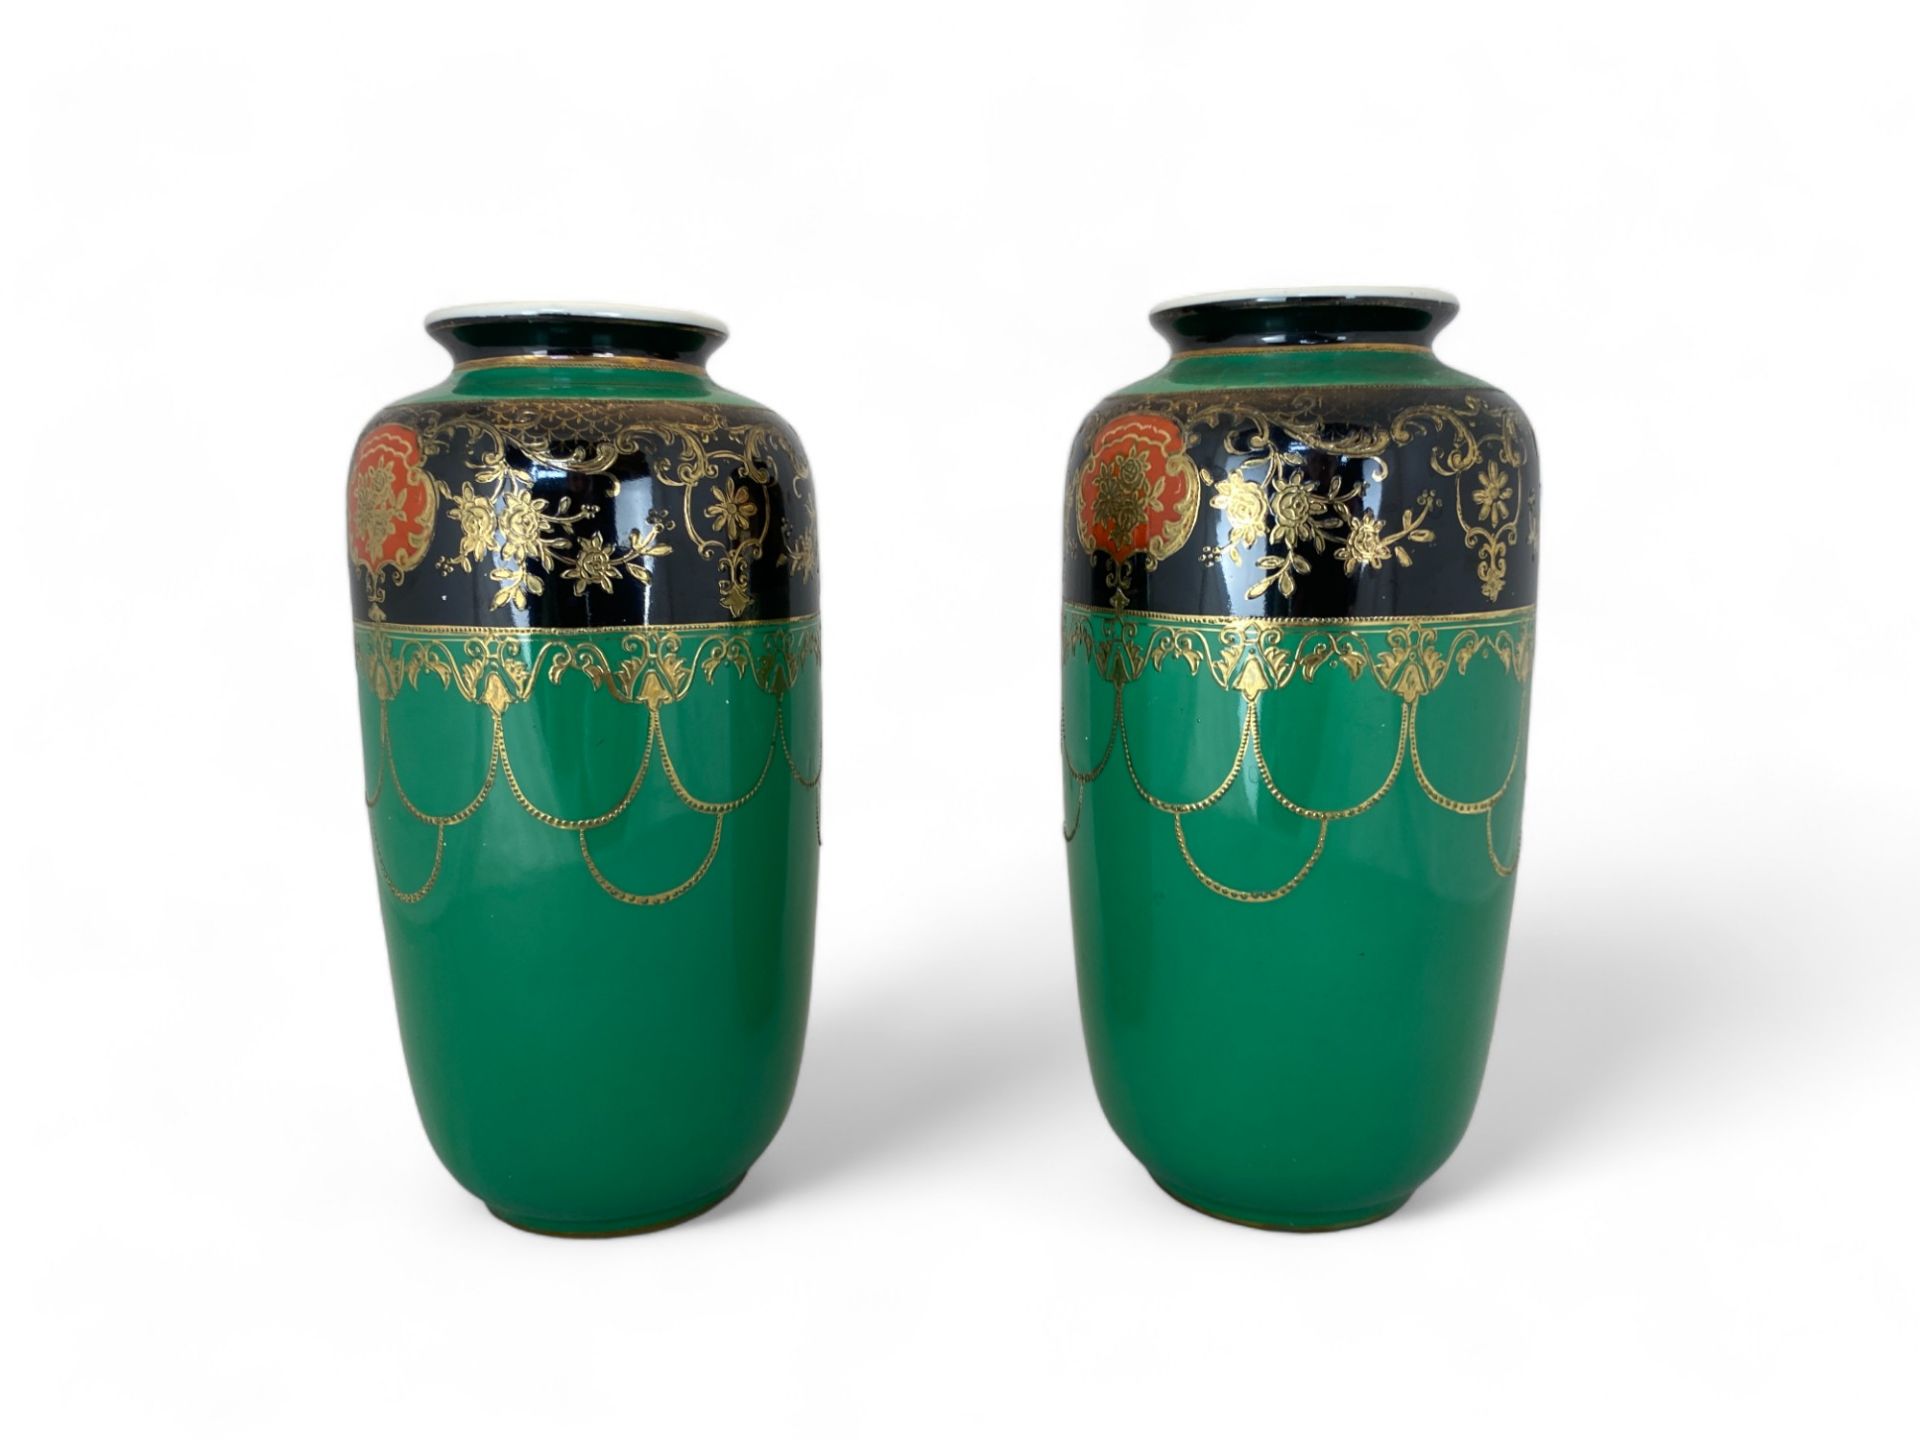 A pair of early 20th century Japanese Noritake vases